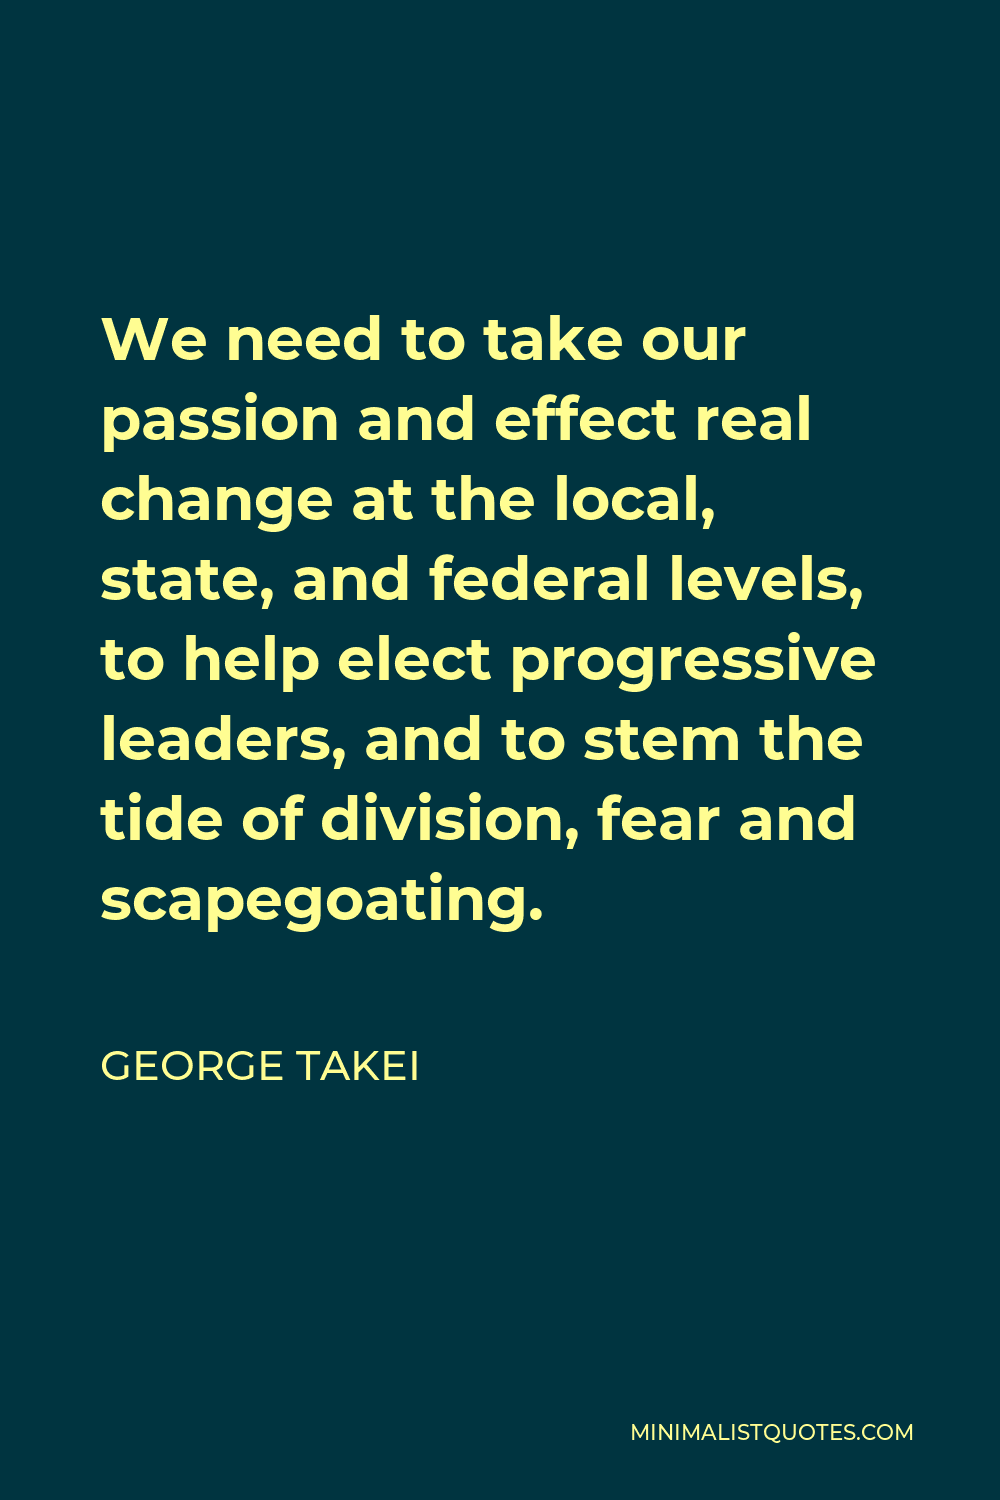 George Takei Quote - We need to take our passion and effect real change at the local, state, and federal levels, to help elect progressive leaders, and to stem the tide of division, fear and scapegoating.